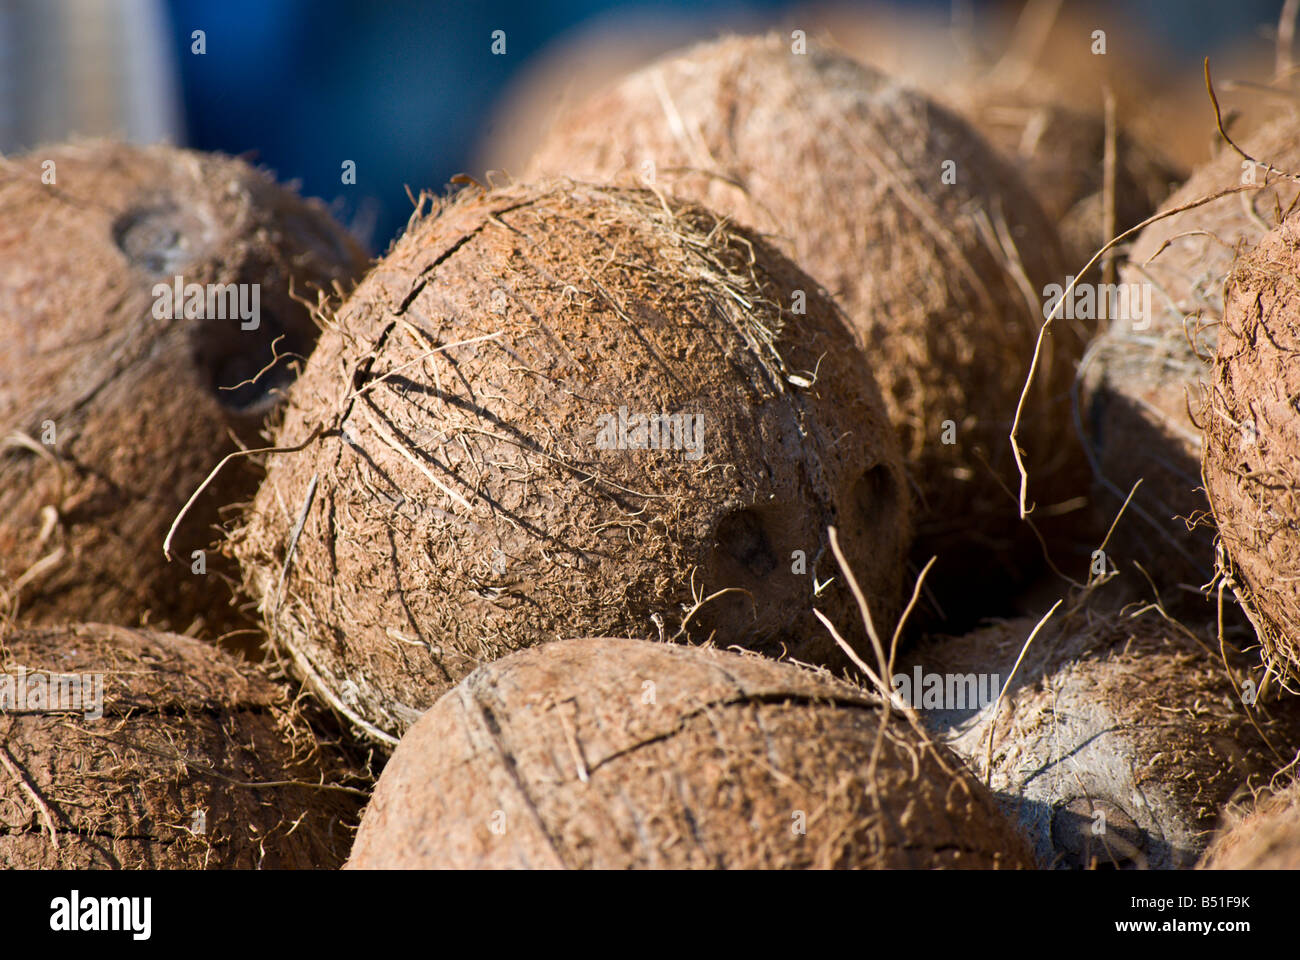 Shucked coconuts sit in a stack Stock Photo